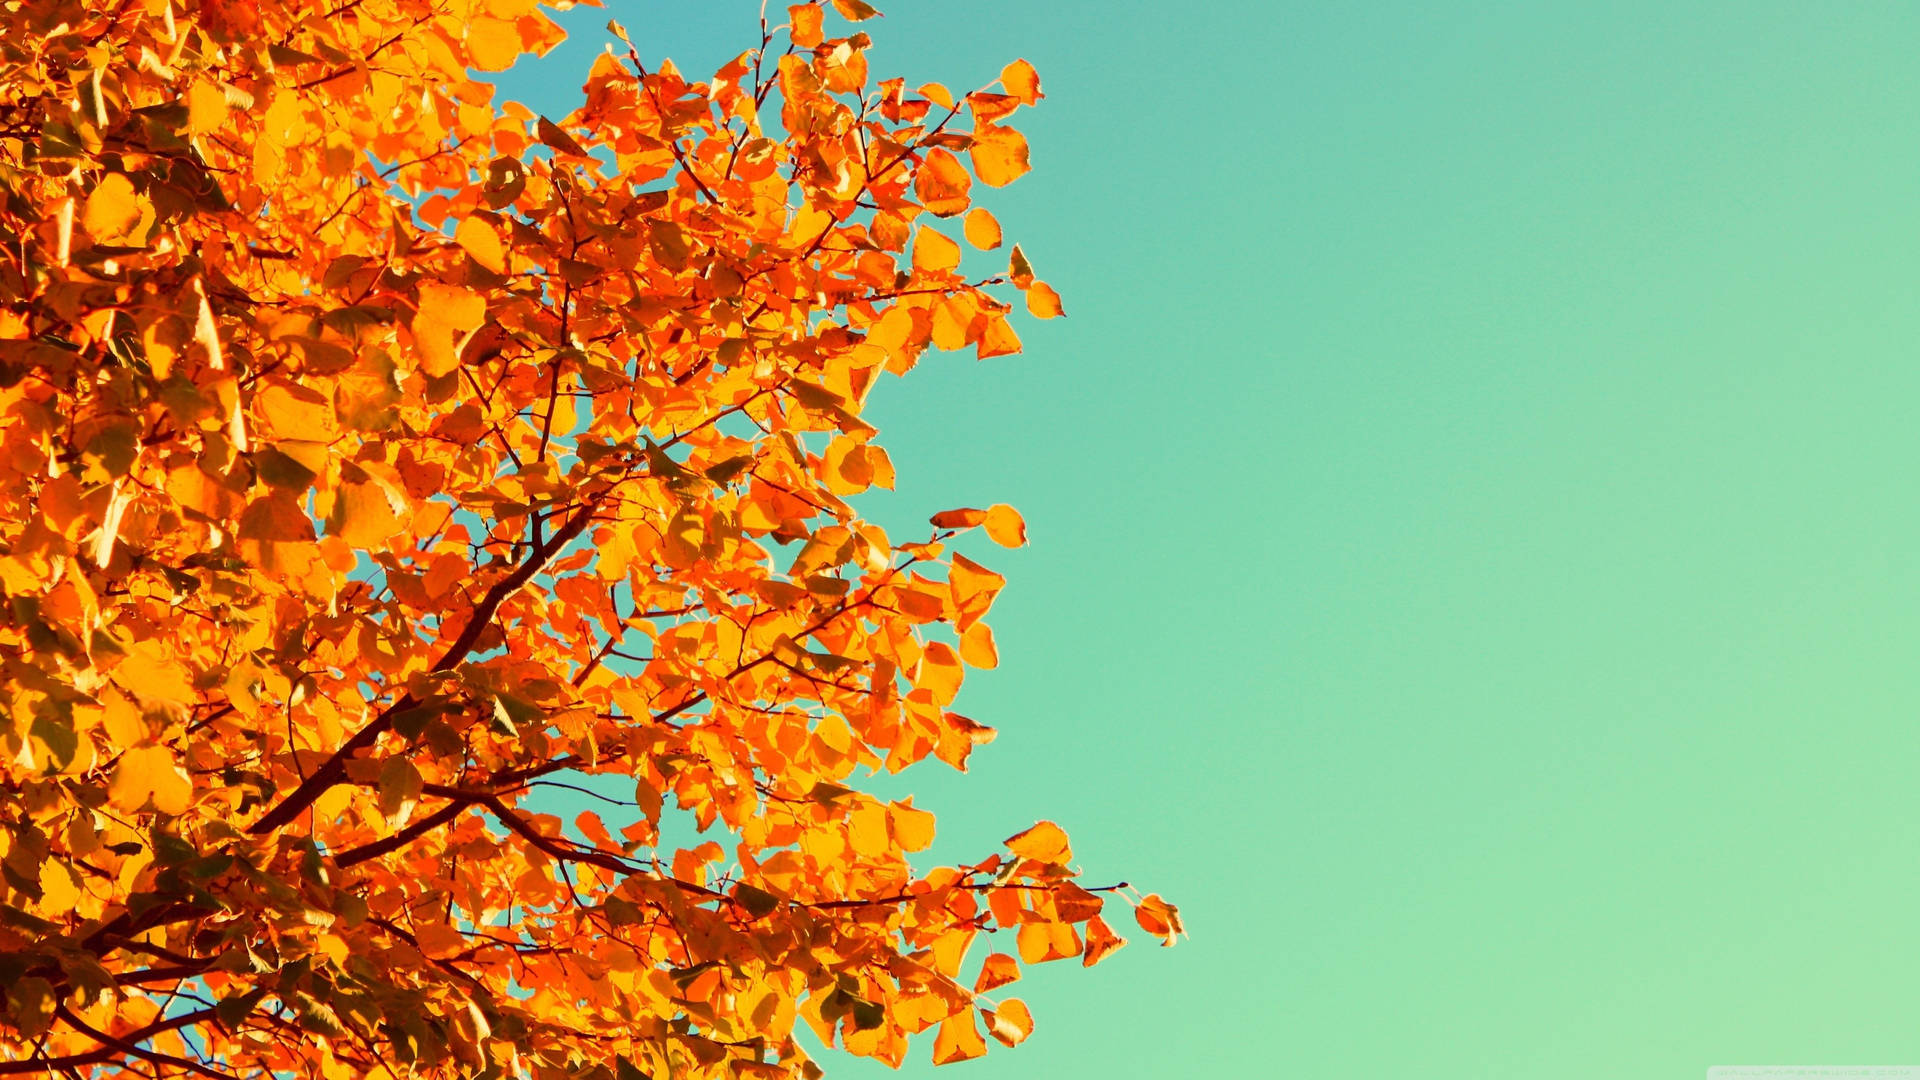 Get Ready for Autumn with this Cute October Scene Wallpaper